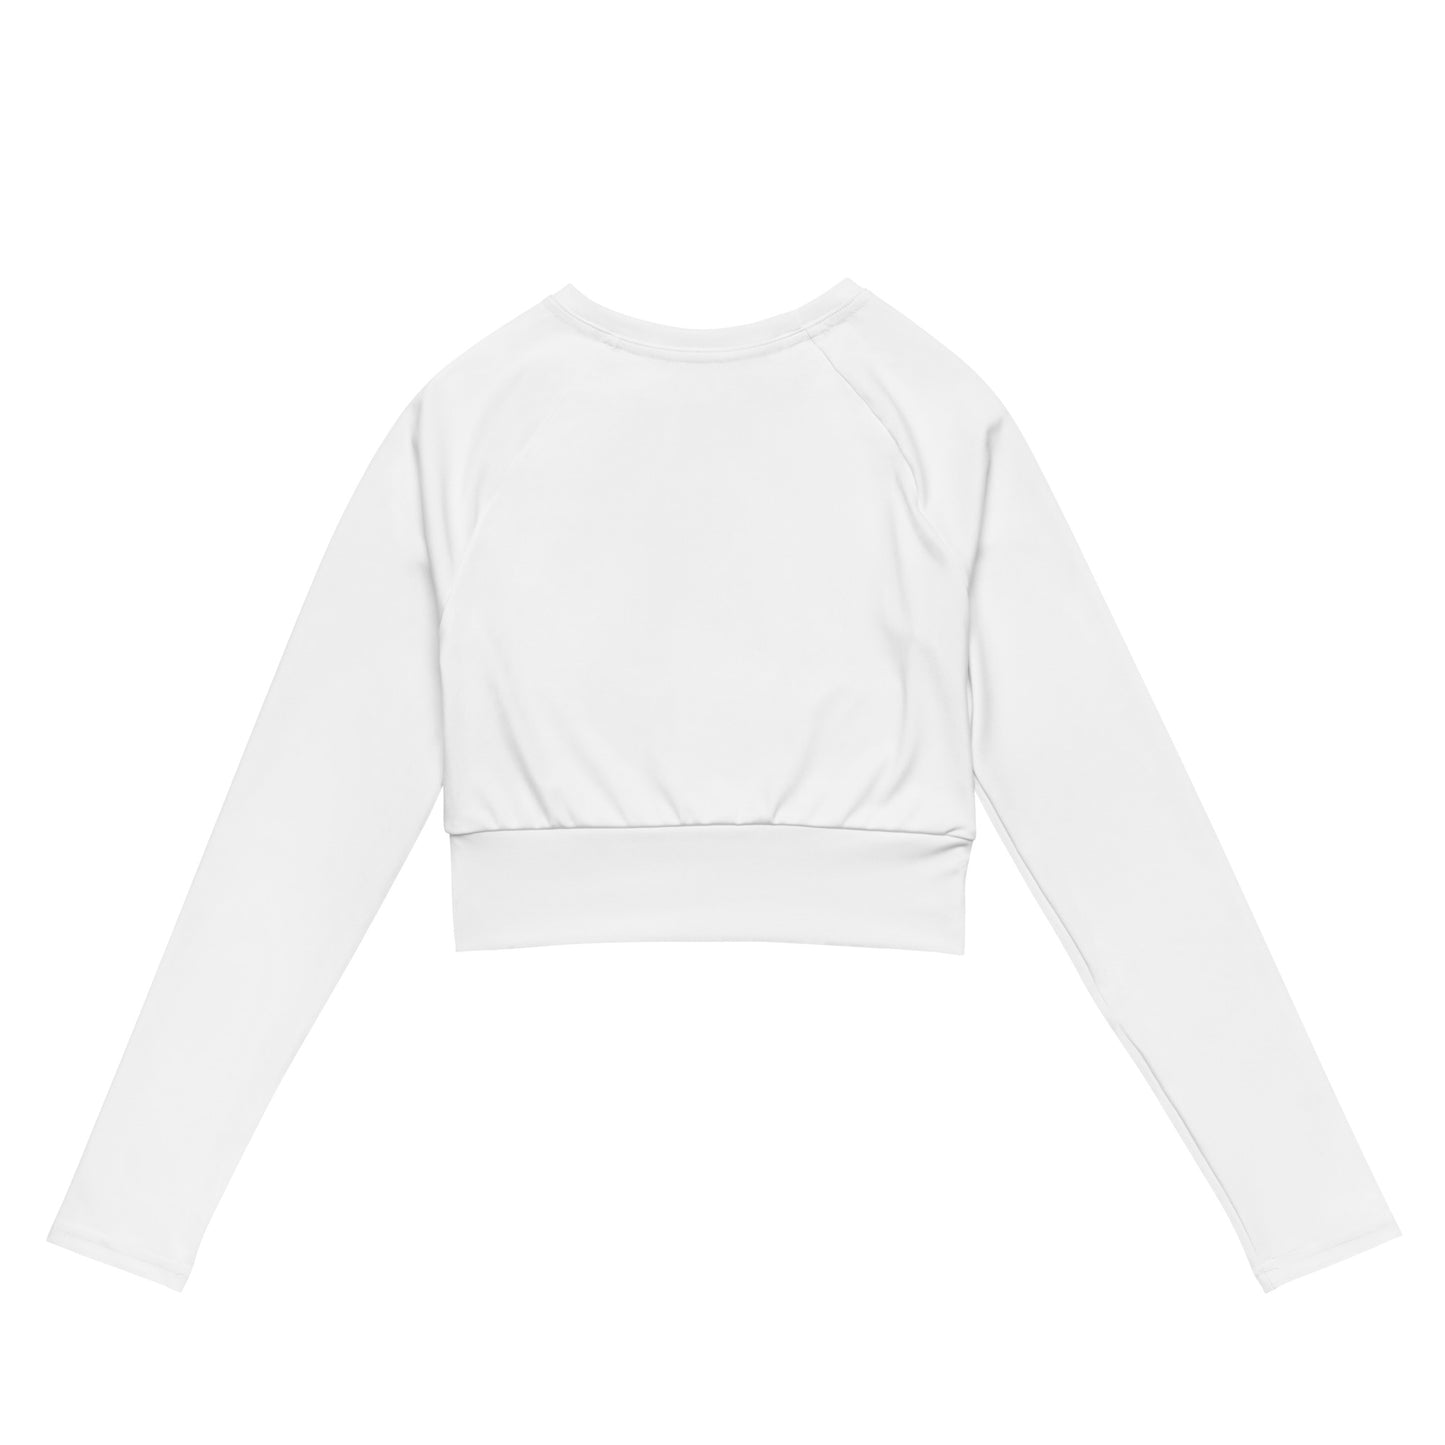 Knqv "Live Life | Recycled long-sleeve crop top